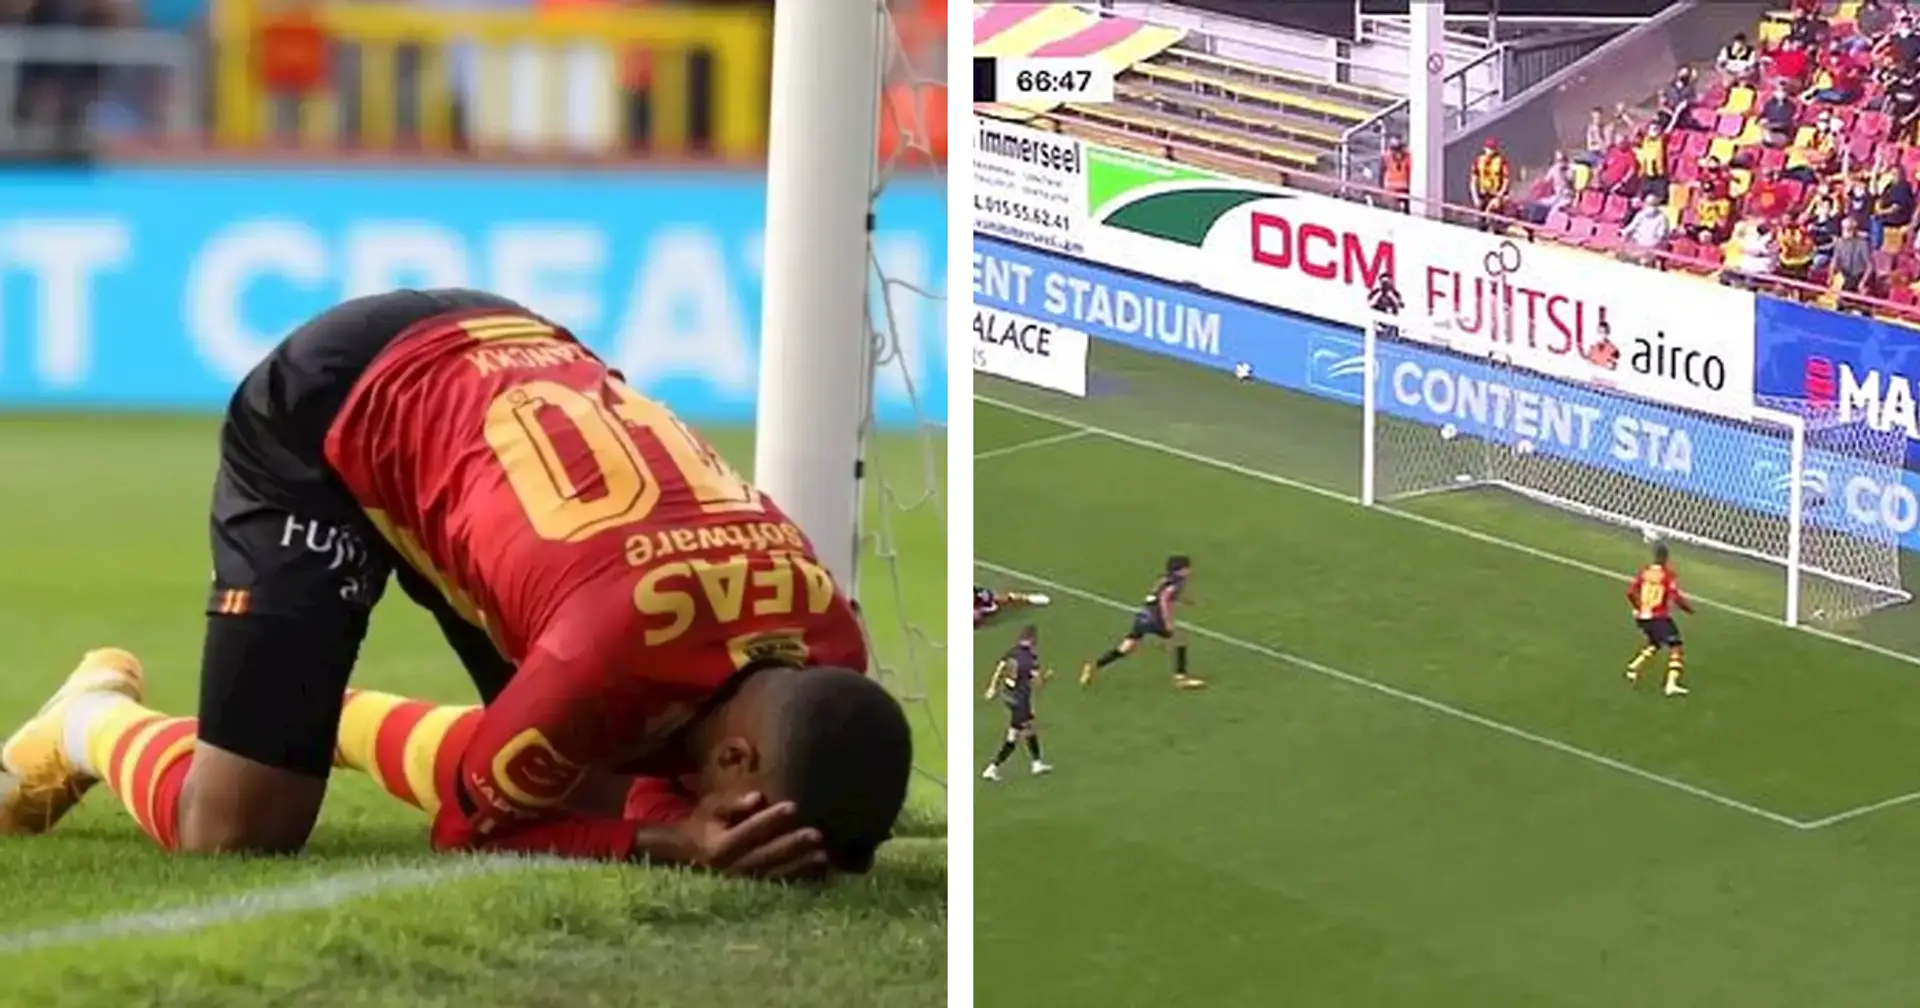 Miss of the season? Midfielder of Belgium top-flight club misses an open goal from two yards